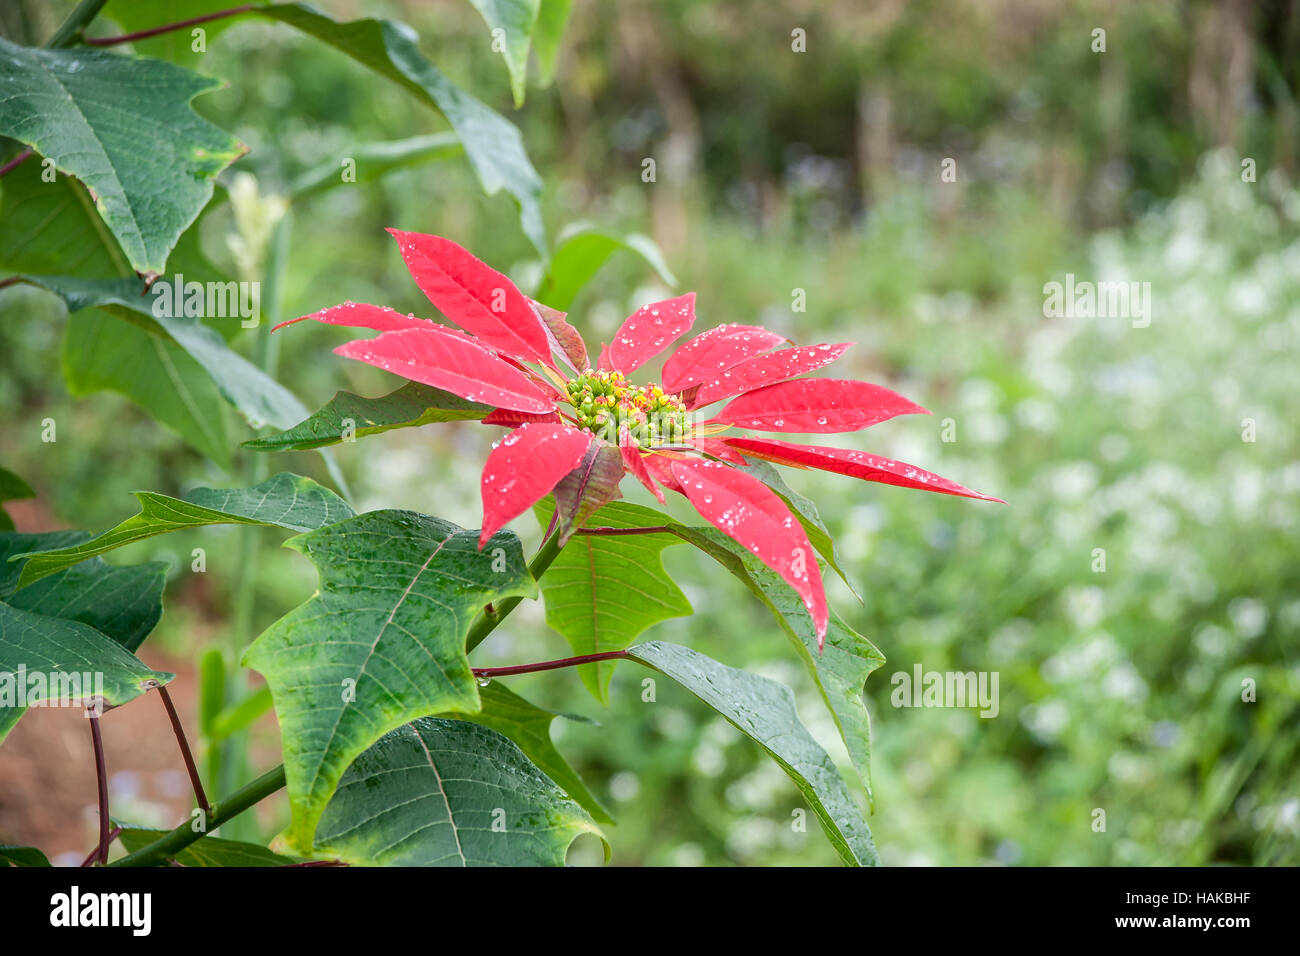 Big red flower of poinsettia Stock Photo